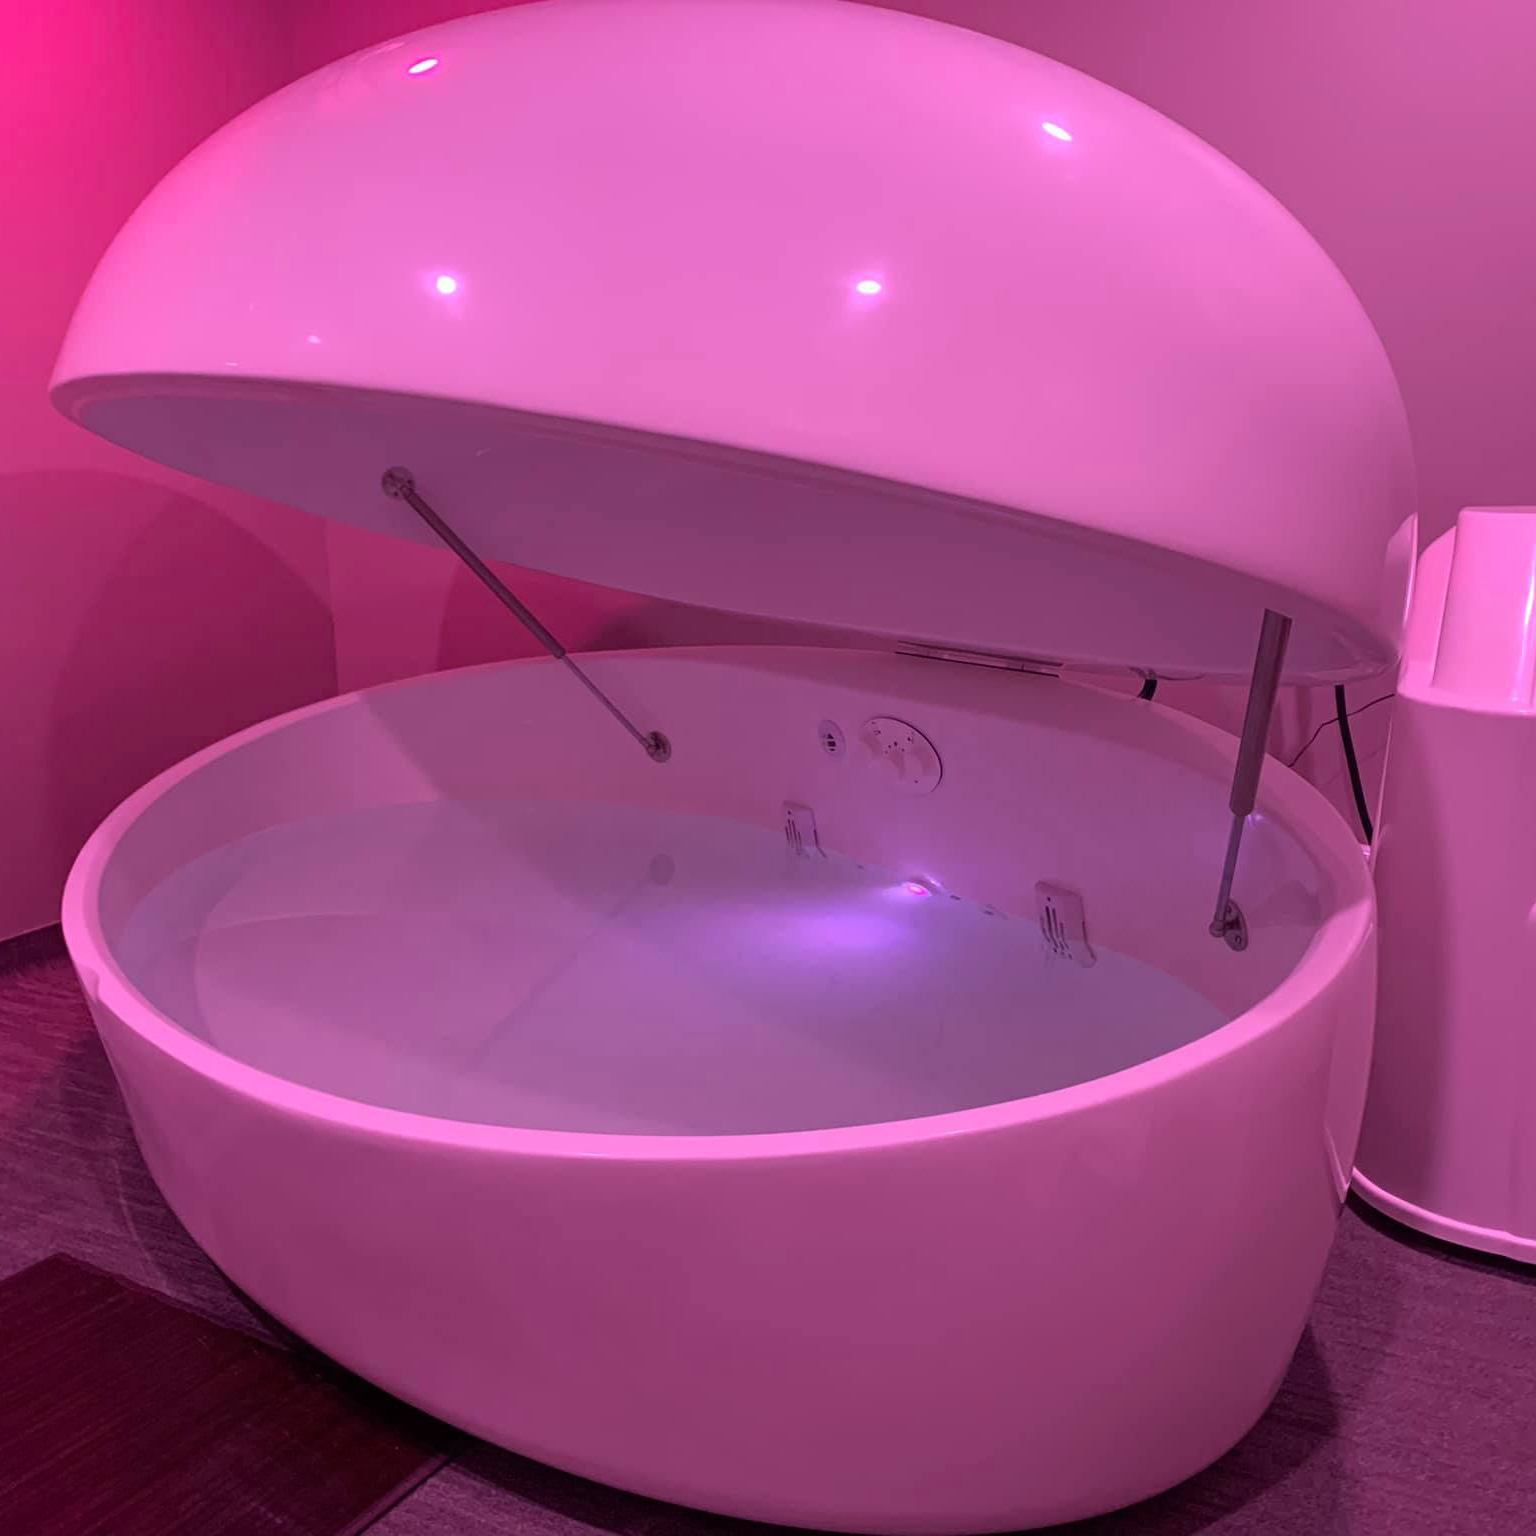 The Blue Heart Pod is a complete R.E.S.T (sensory deprivation experience) for flotation therapy